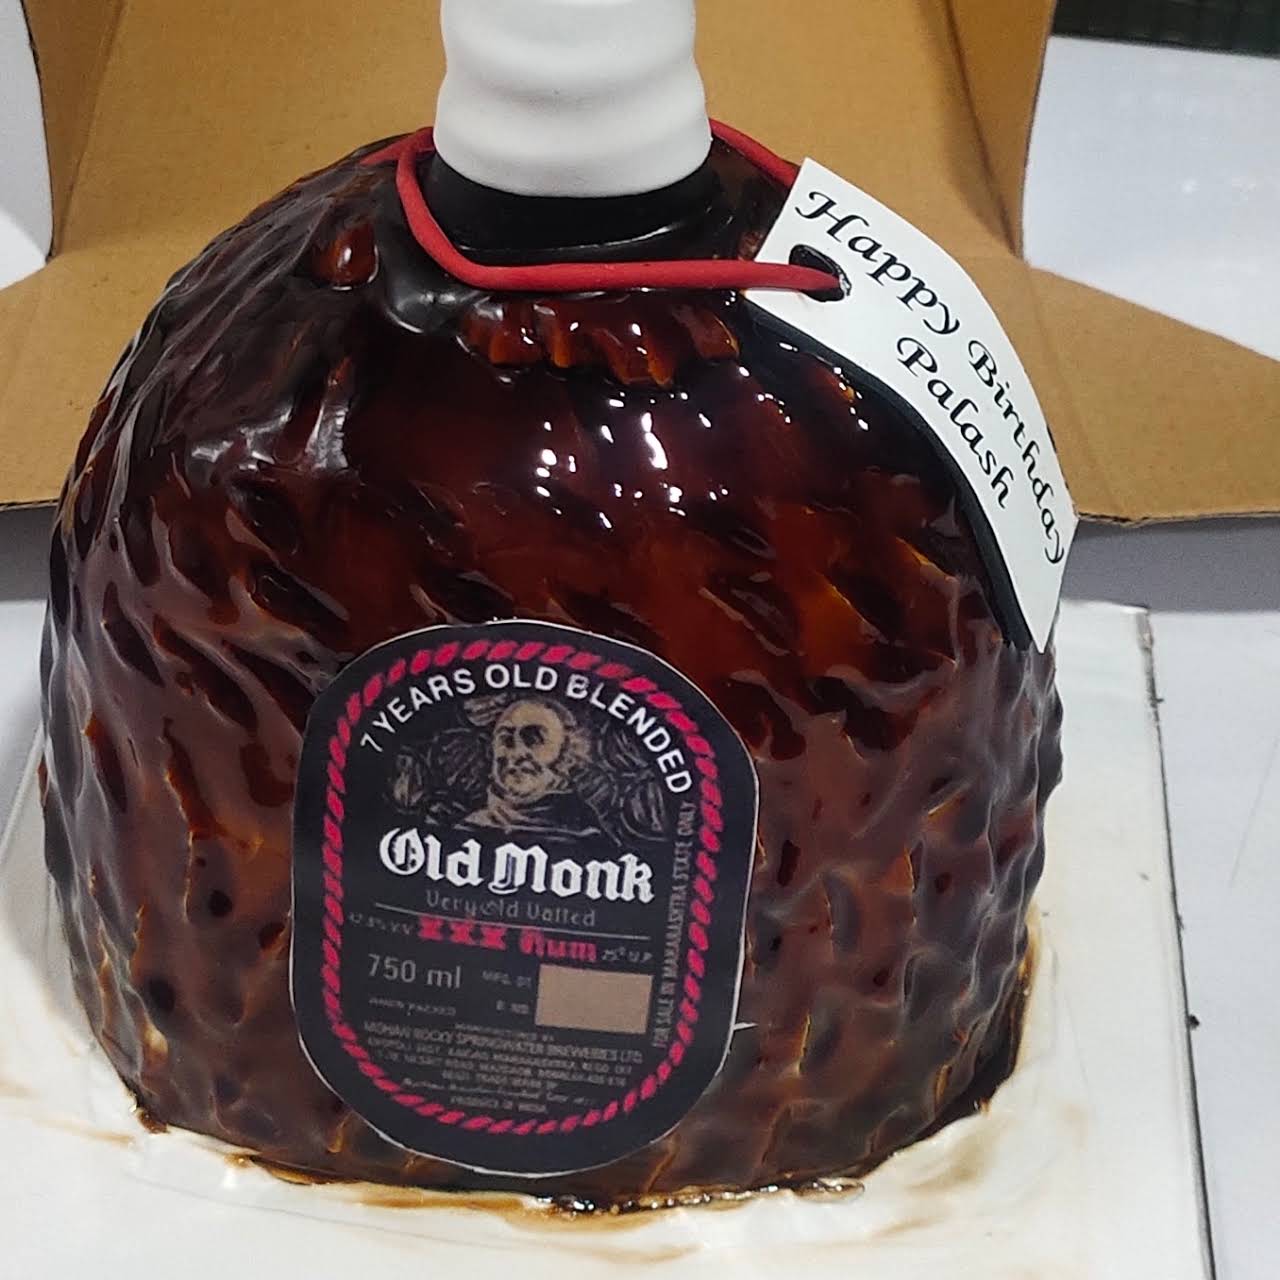 ♦️Its old monk theme cake ♦️two... - Aditi's Cake Gallery | Facebook